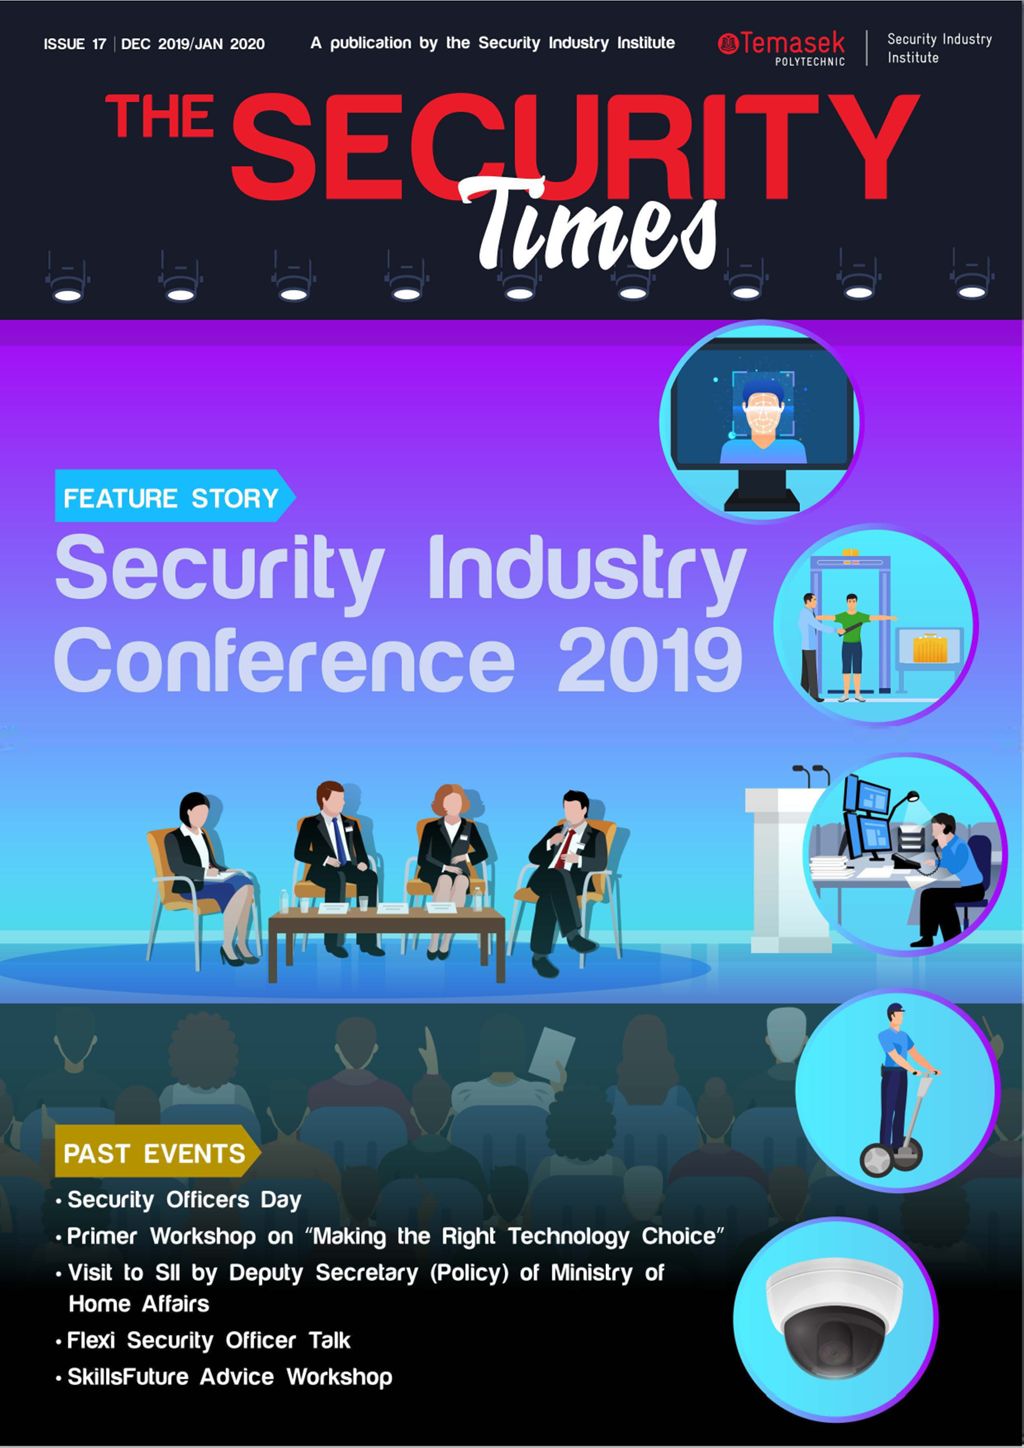 The Security Times : a publication by the Security Industry Institute. Dec. 2019 / Jan. 2020. Issue 17